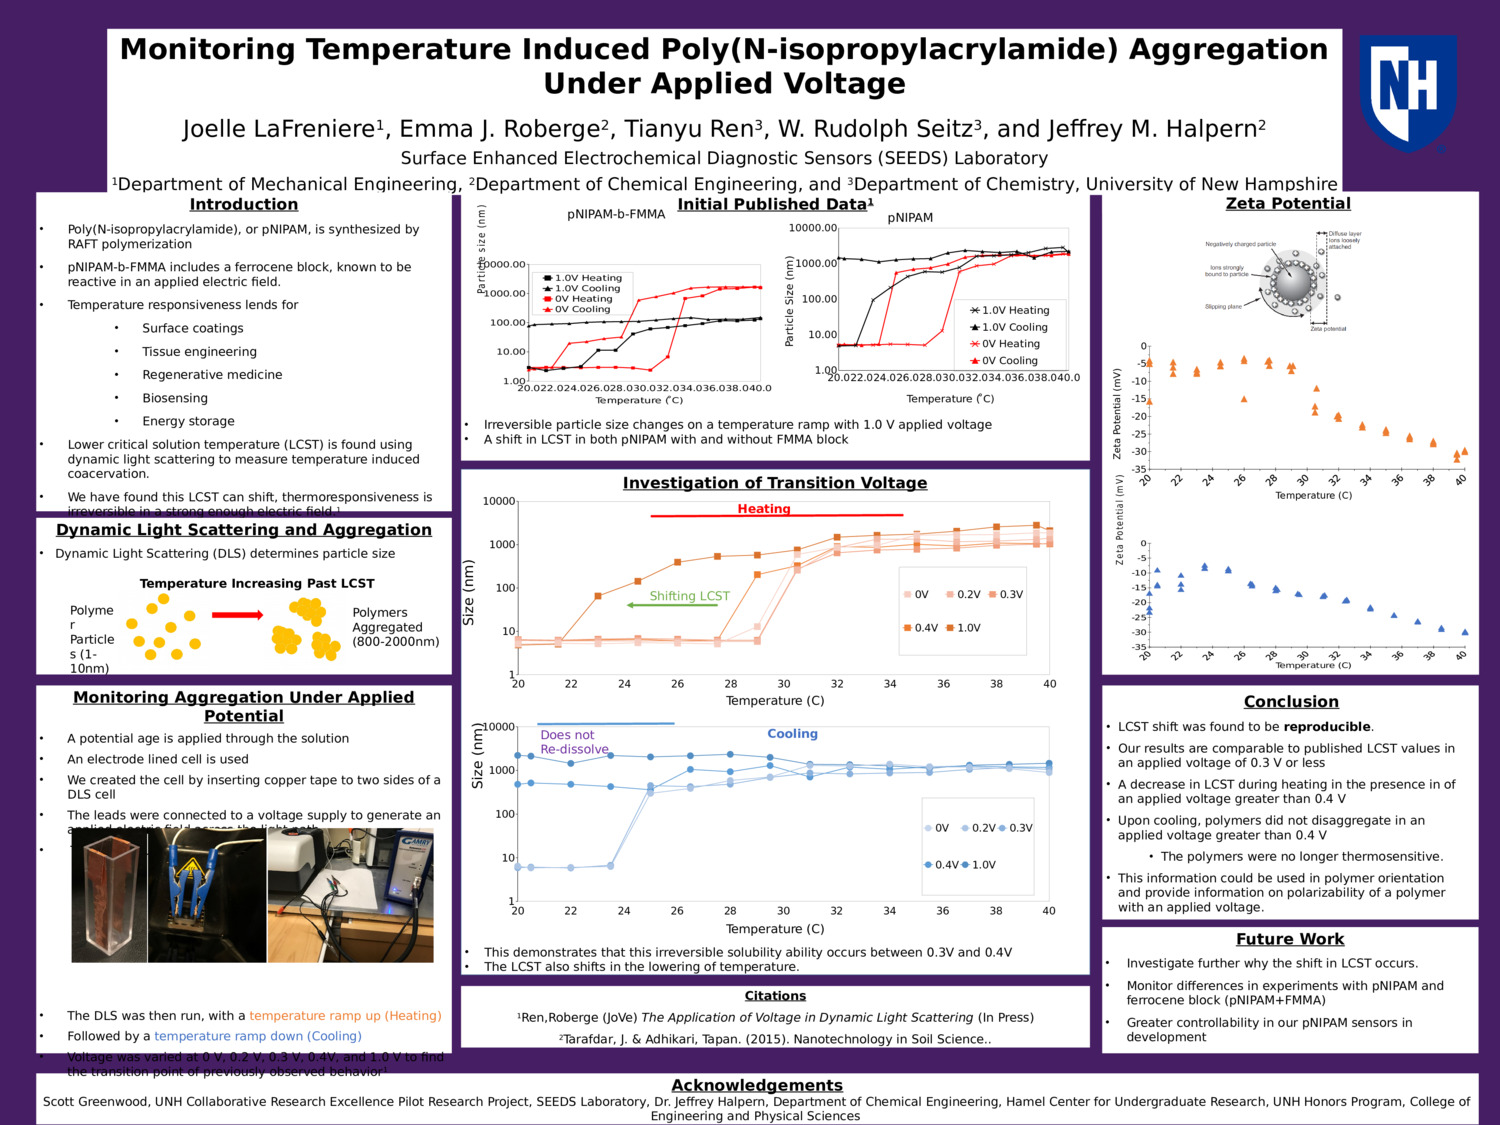 Monitoring Temperature Induced Poly(N-Isopropylacrylamide) Aggregation Under Applied Voltage by jlafreniere